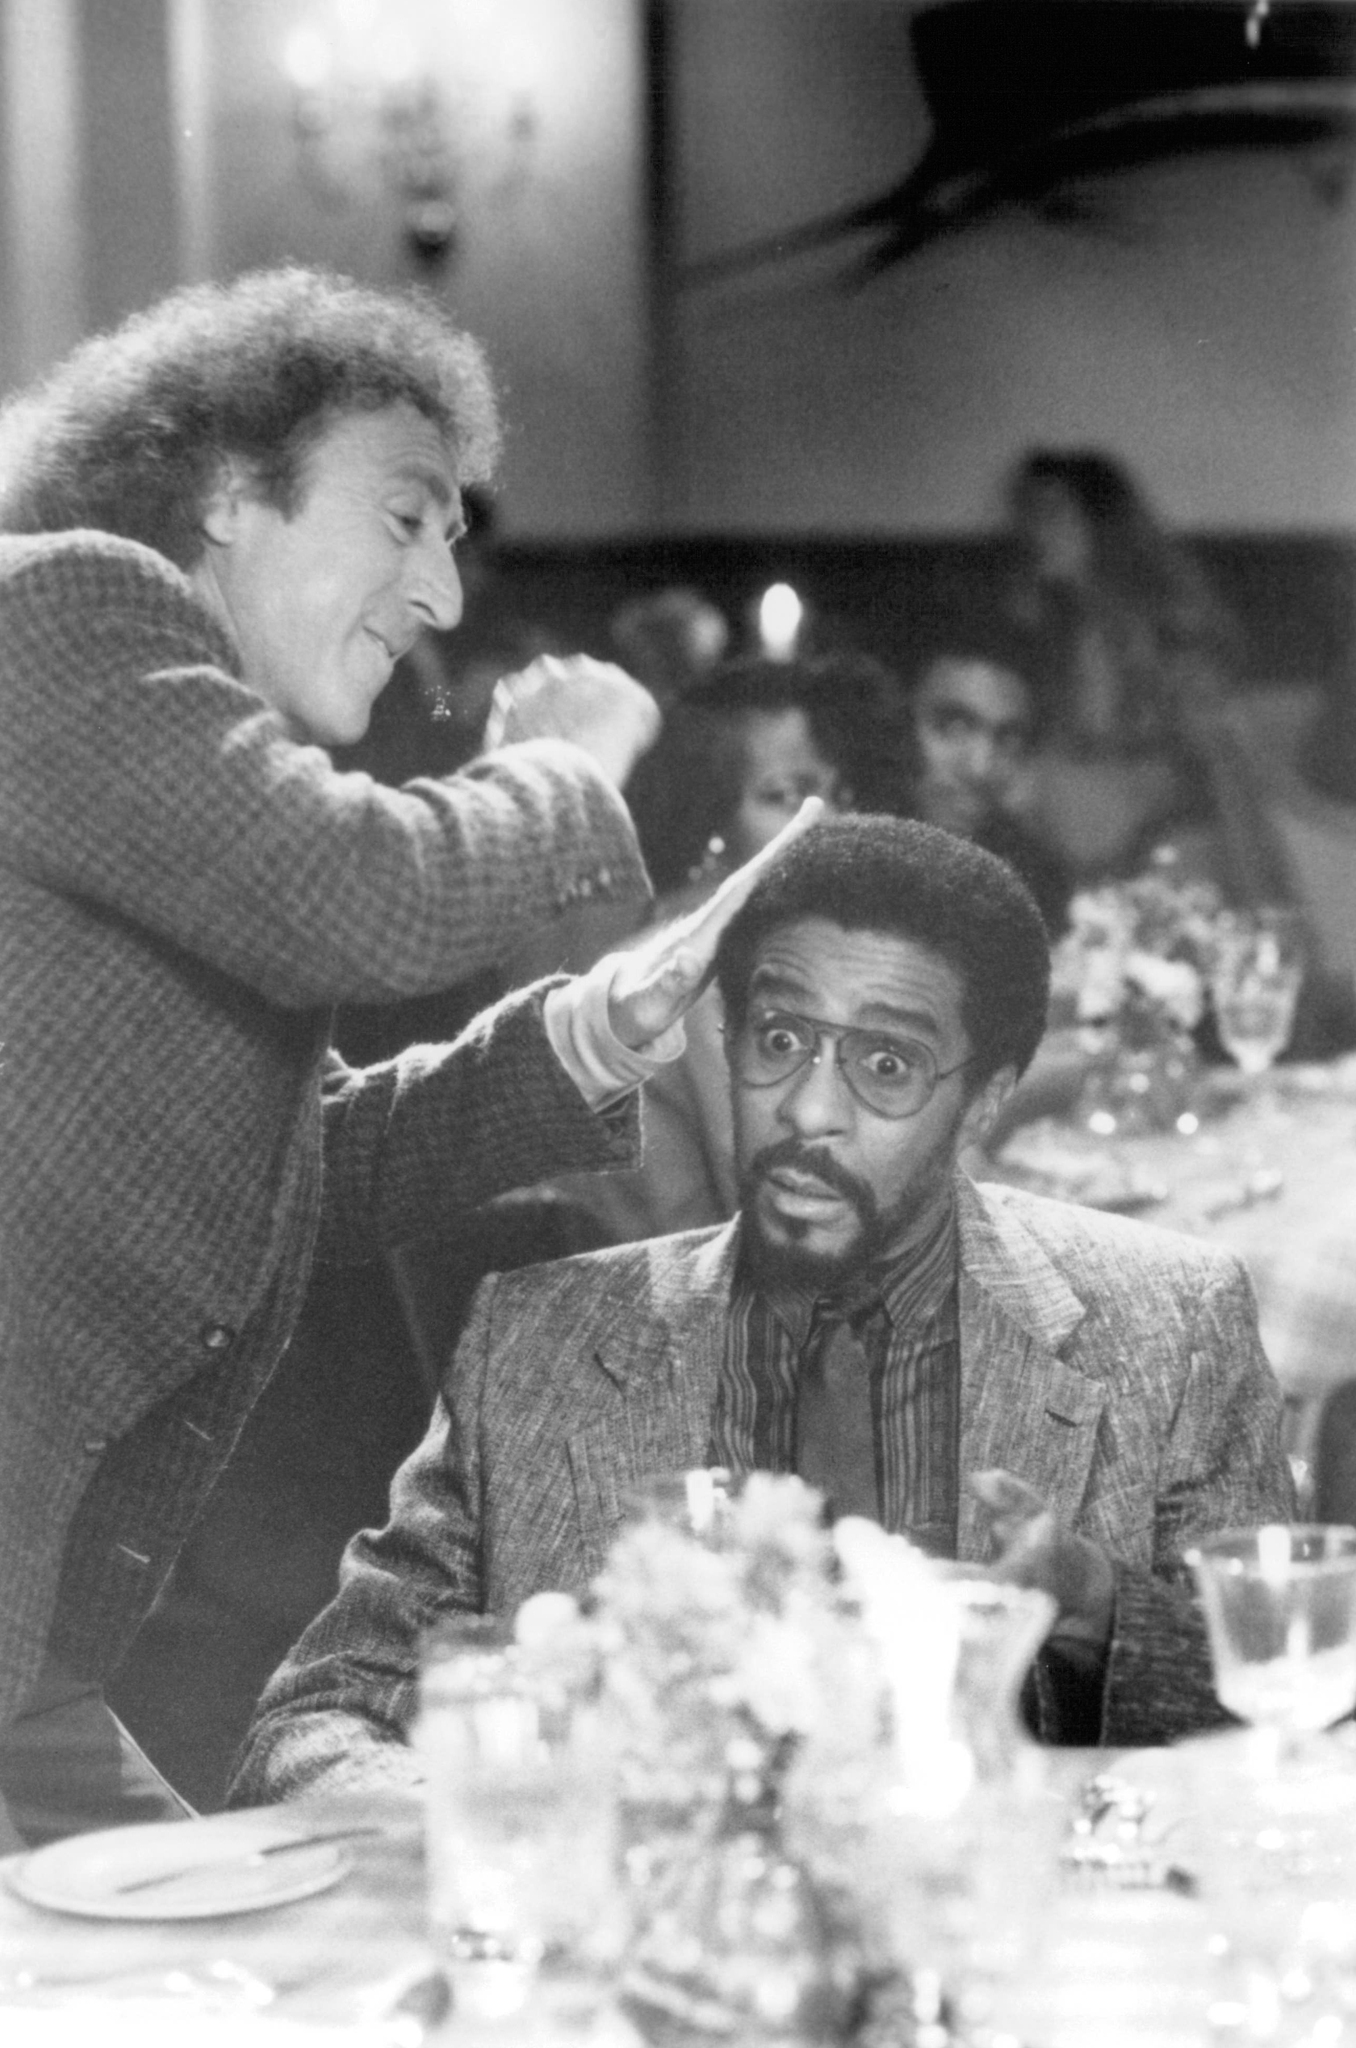 Still of Gene Wilder and Richard Pryor in Another You (1991)